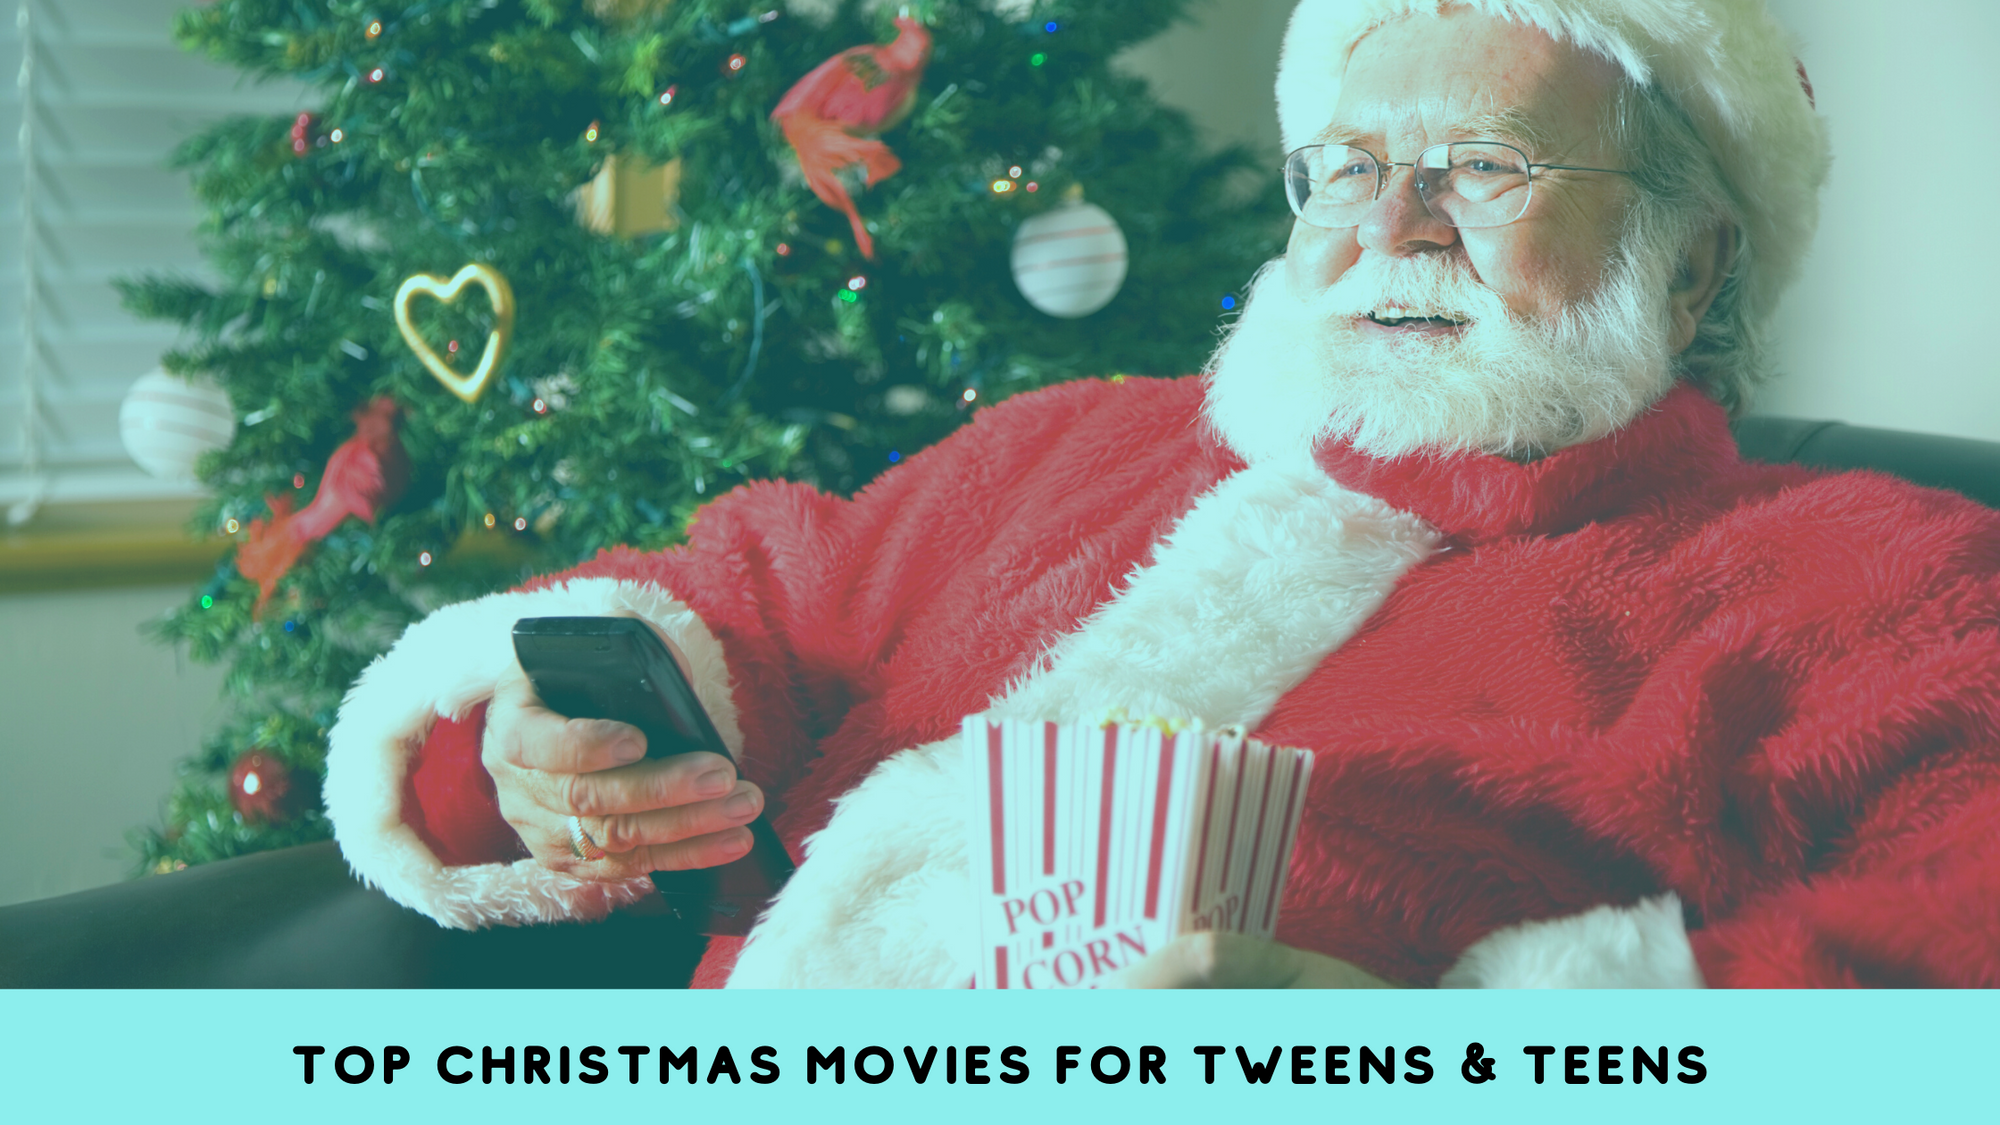 Top Christmas movies for tweens and teens